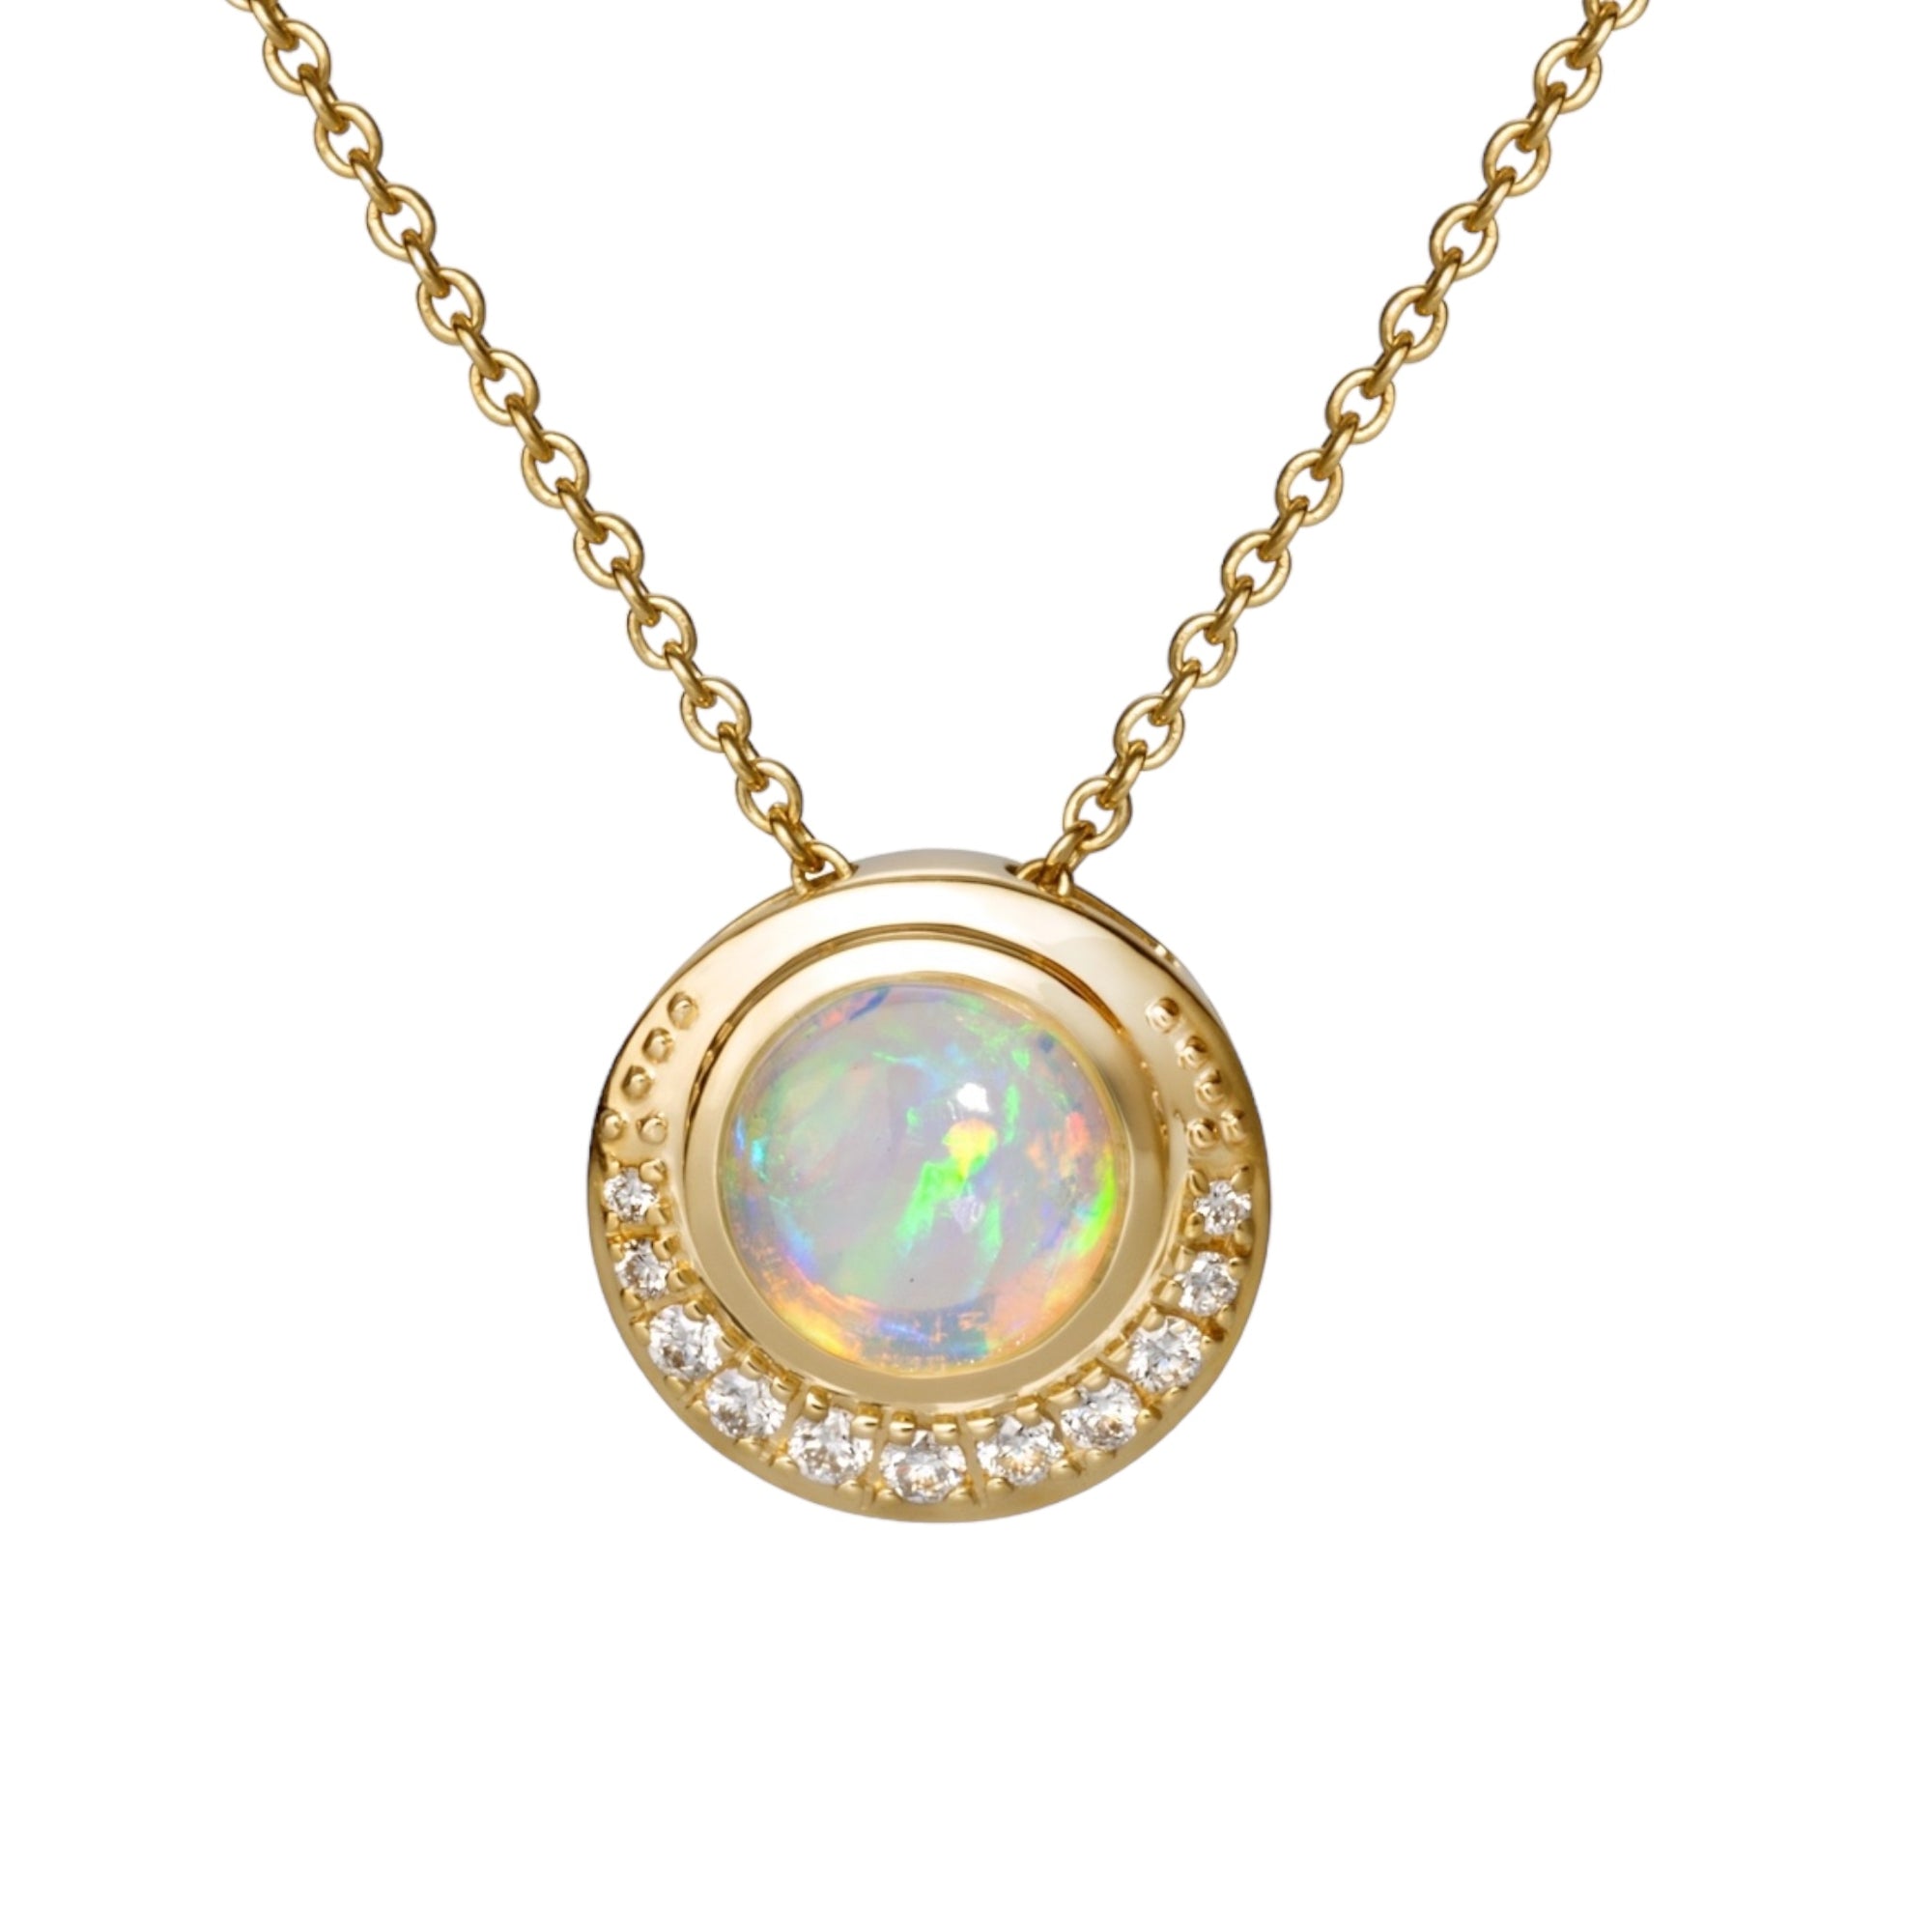 Blue Hour Single Pendant by Martha Seely Blue Hour Single Pendant by Martha Seely Stats: With it's flashing colors, the almost mystical opal pendant will make you feel like summer on a winter day. The Welo opal is 8mm round and is surrounded by 11 diamonds (0.1605t cw). The little 18k yellow gold button pendant hangs from an 18” cable chain with a lobster clasp. Feel at one with the universe as you wear this mystical cosmic pendant.